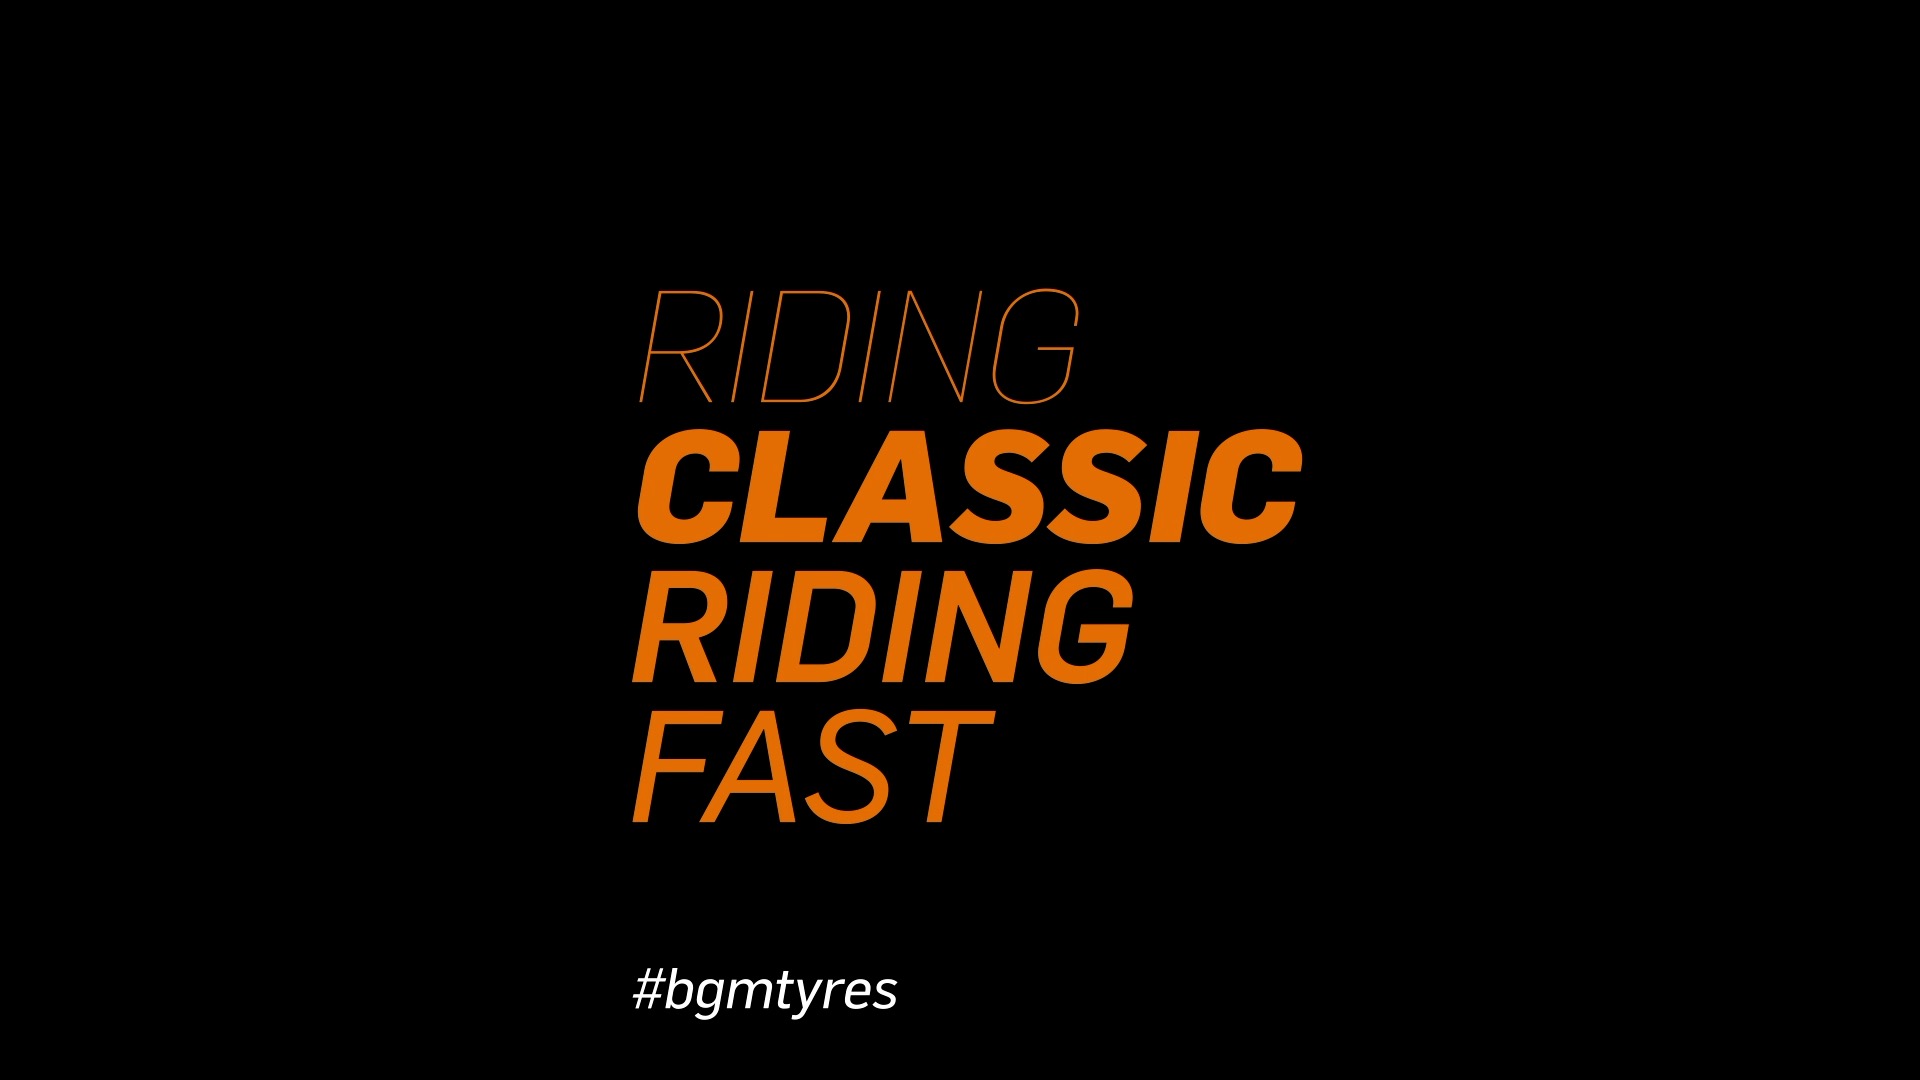 Bgm Riding Classic Riding Fast Bgm Is A Scooter Center Trademark